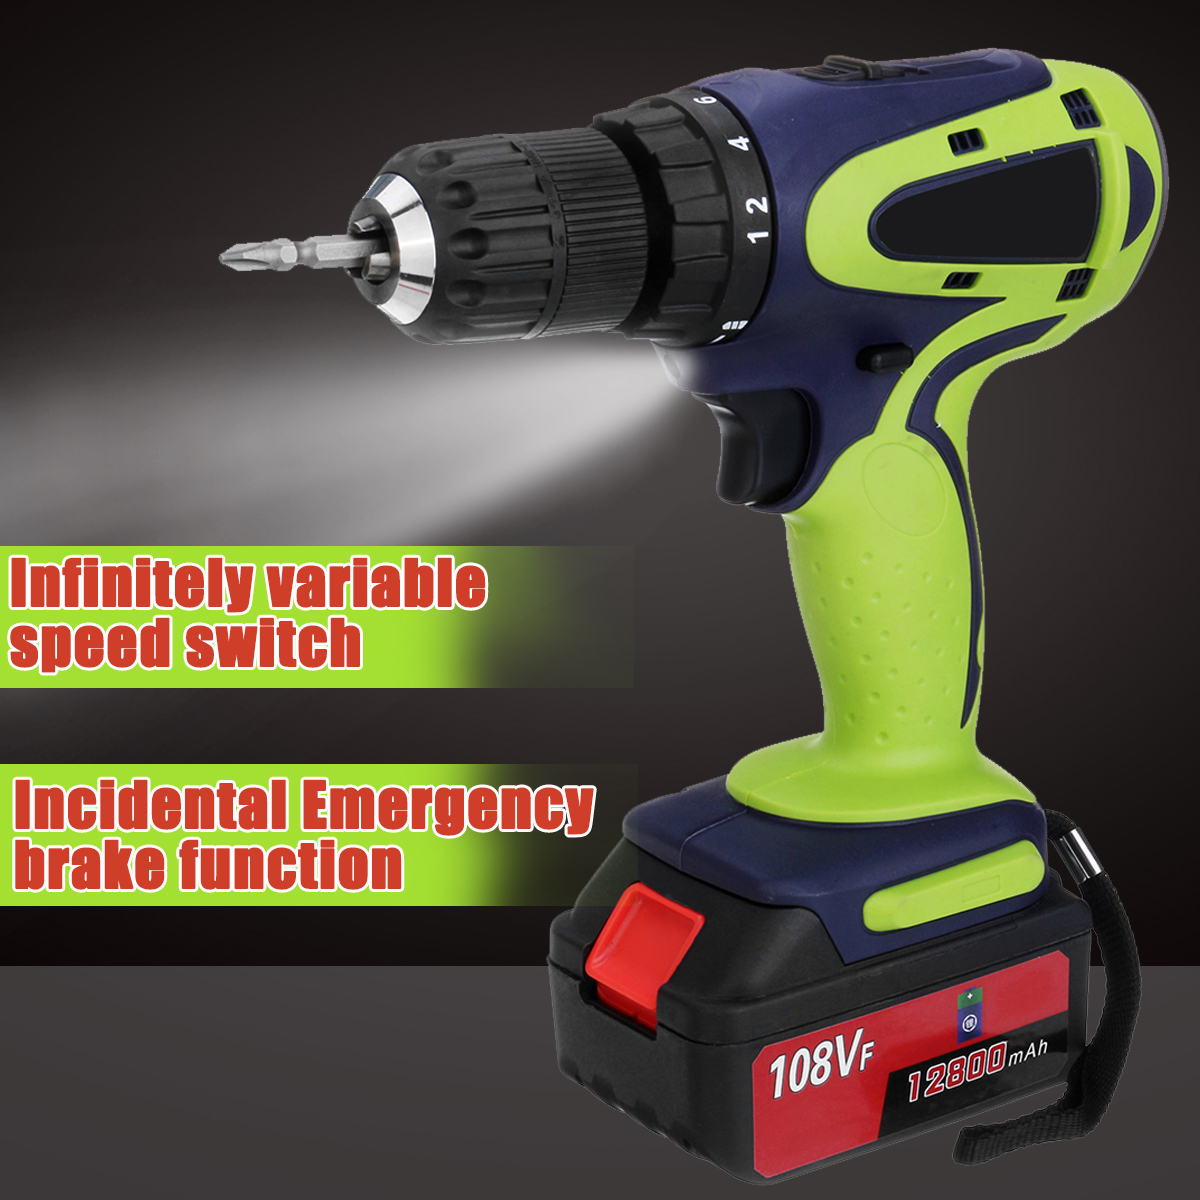 108VF-12800mAh-Dual-Speed-Cordless-Drill-Multifunctional-High-Power-Household-Electric-Drills-W-Acce-1457224-2